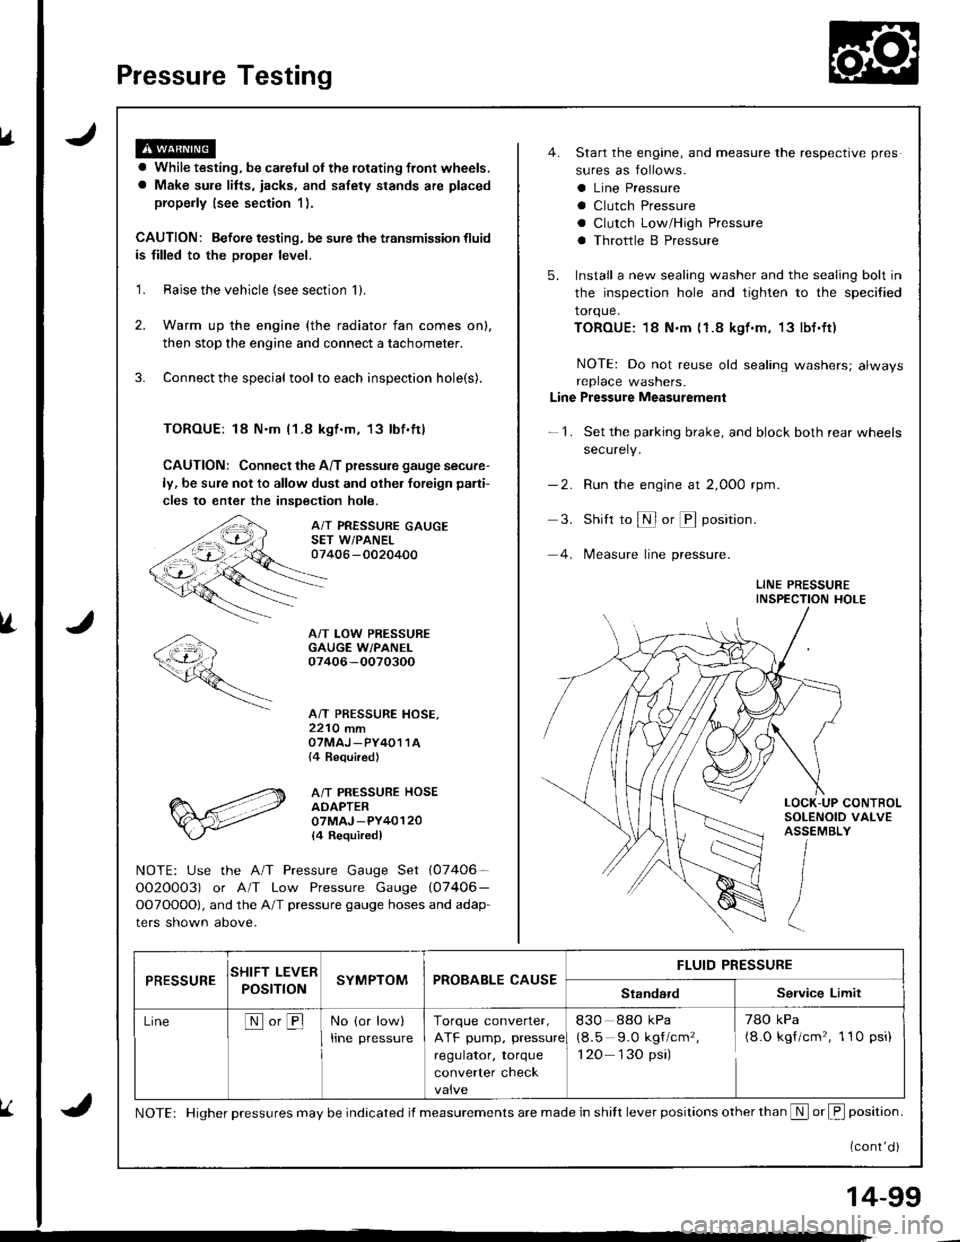 HONDA INTEGRA 1998 4.G Workshop Manual Pressure Testing
a While testing, be careJulot the rotating front wheels.
a Make sule litts, iacks, and safety stands are placed
properly (see section 1).
CAUTION: Befoie testing, be sure the transmis